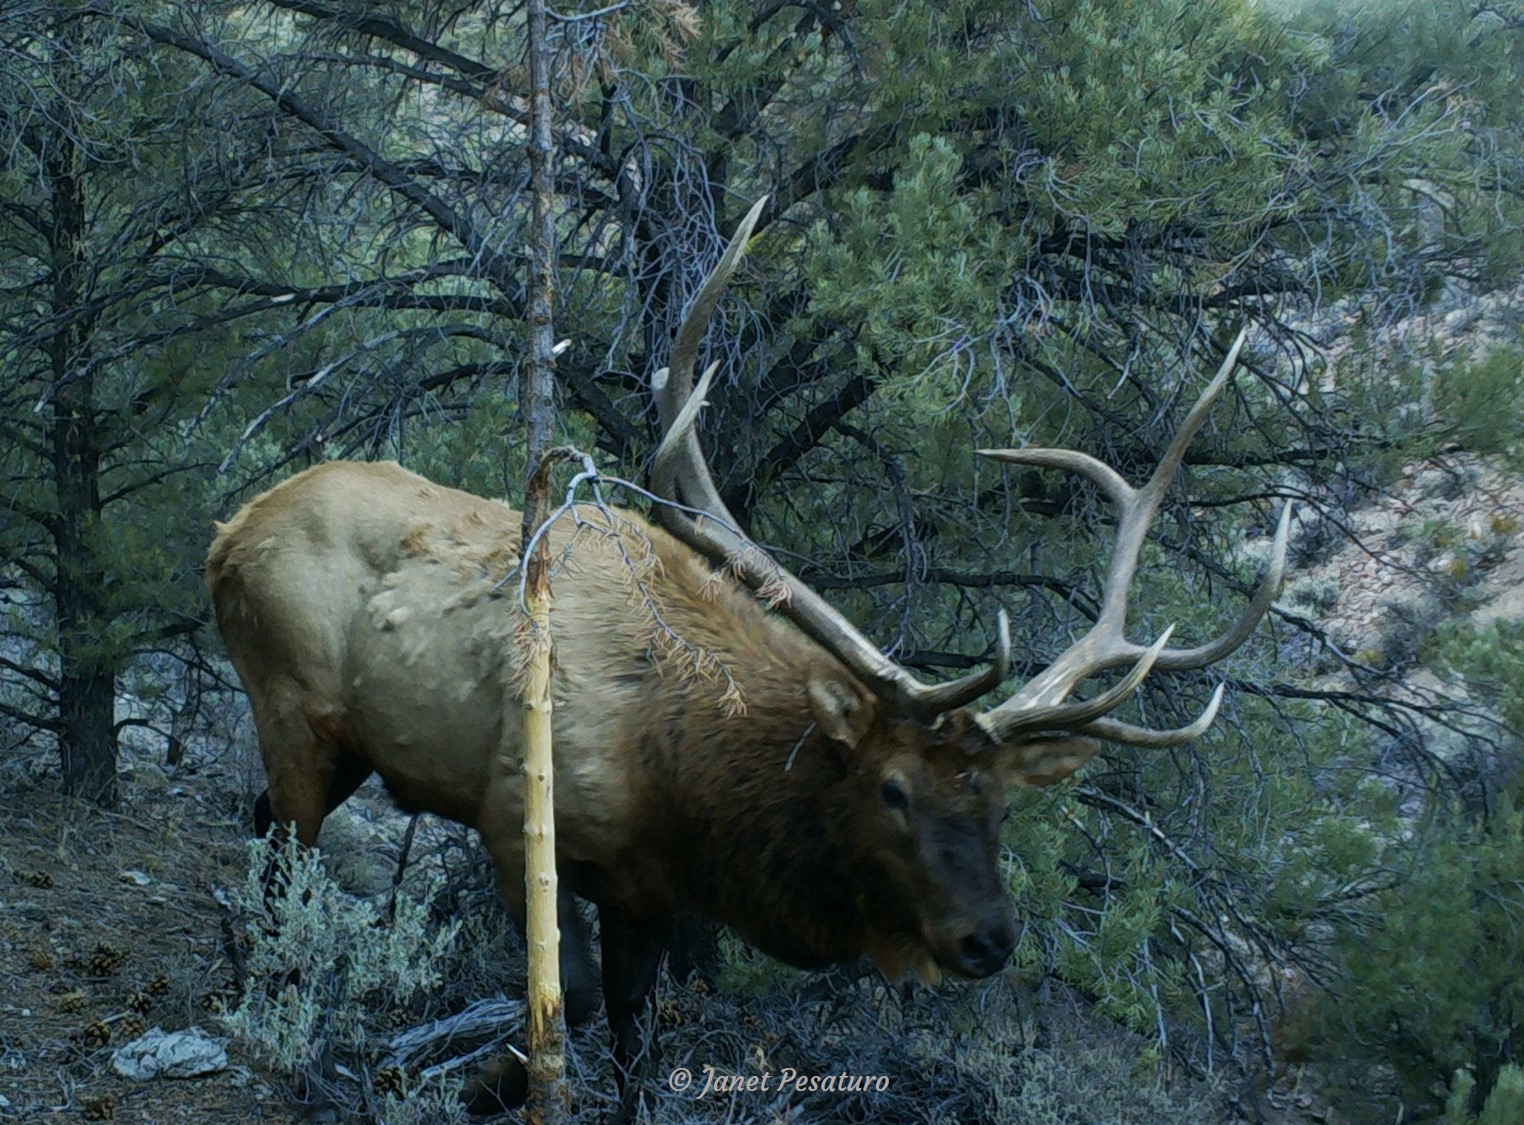 Bull elk at a tree that he uses to rub his antlers and leave his scent. Identifying elk tracks and sign allowed me to get this photo with a trail camera.